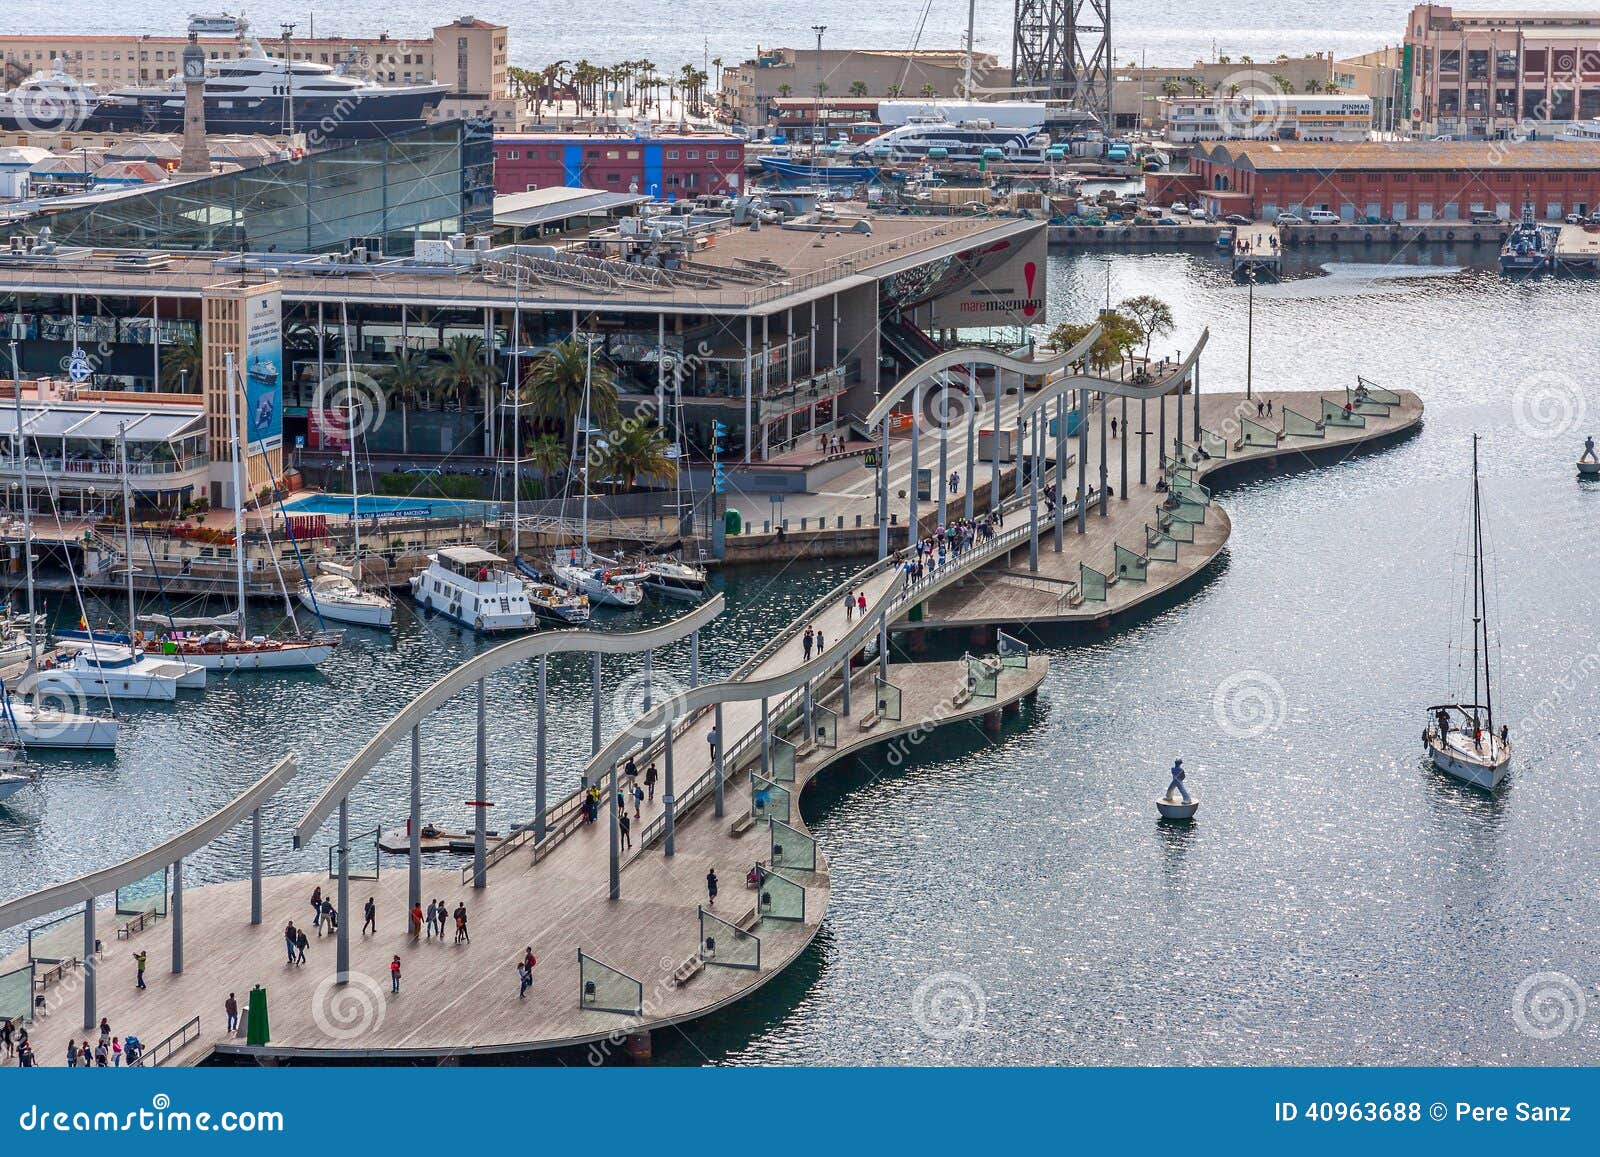 Port Vell In Barcelona Editorial Stock Photo - Image: 40963688